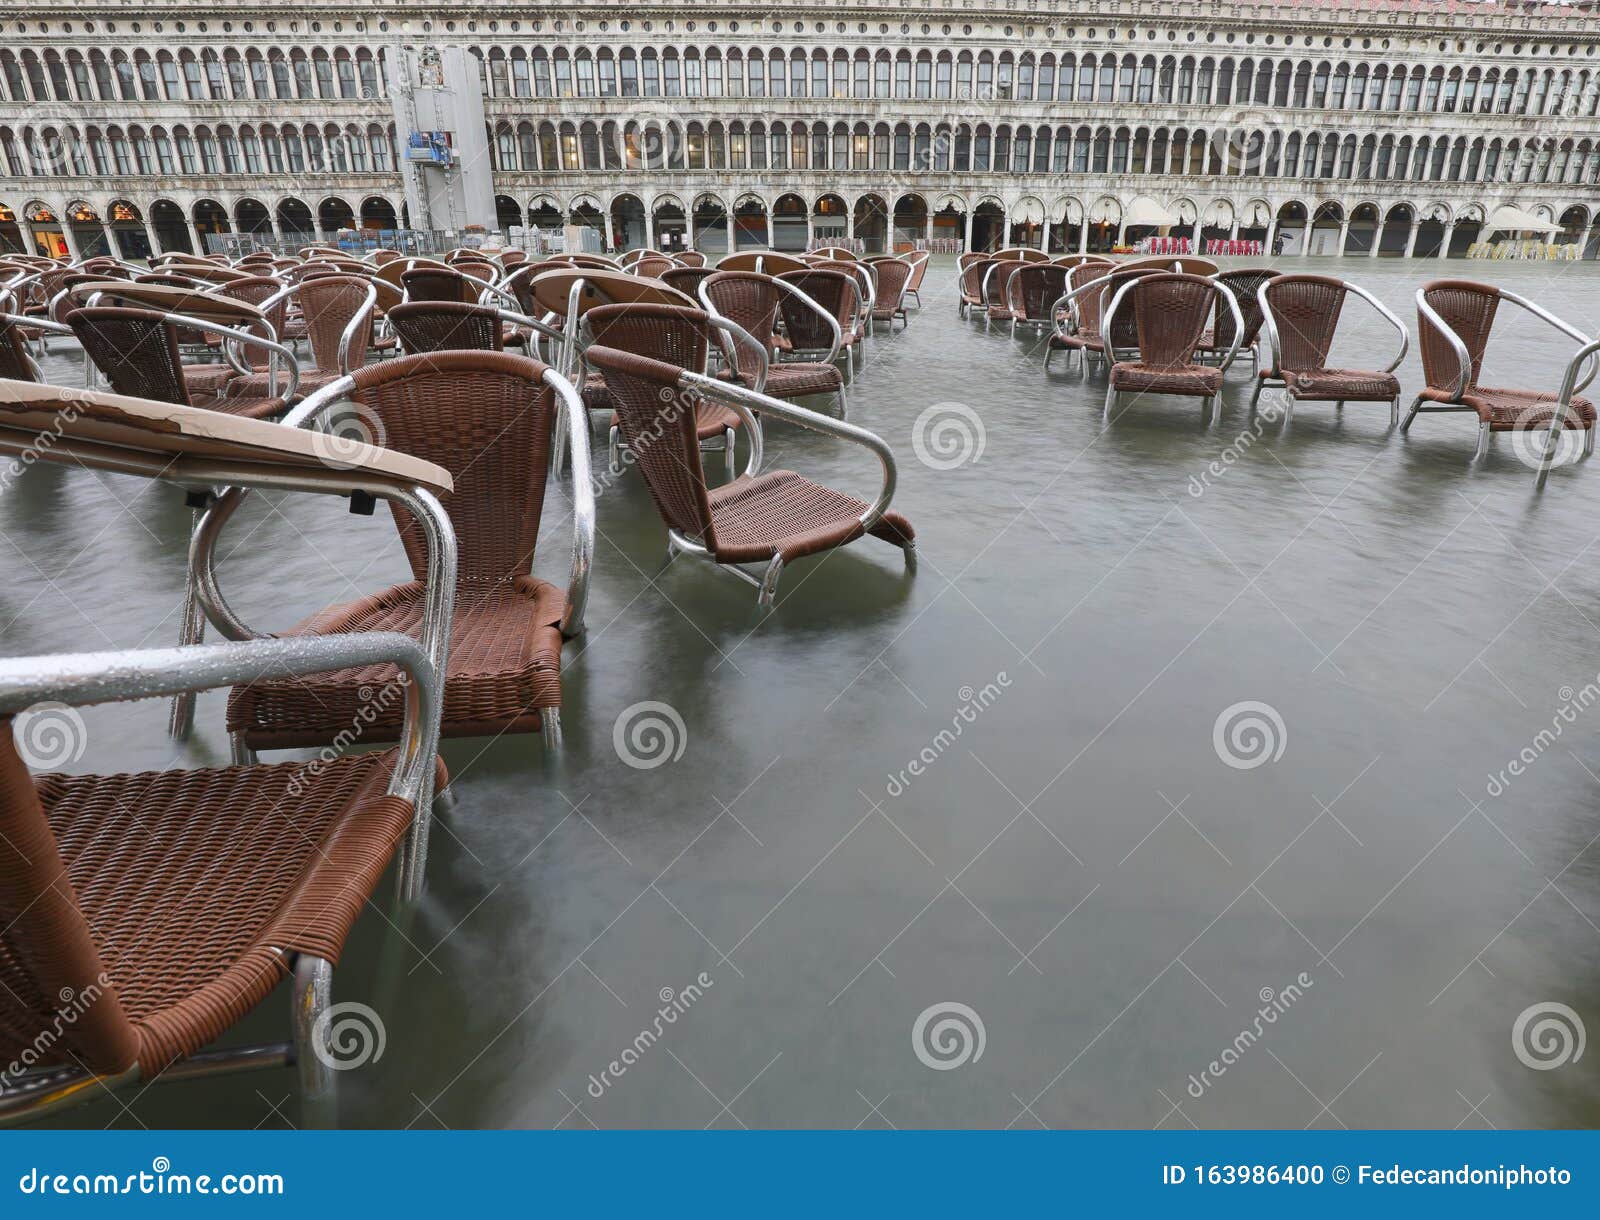 many brown chairs on the water during the record high tide in ve